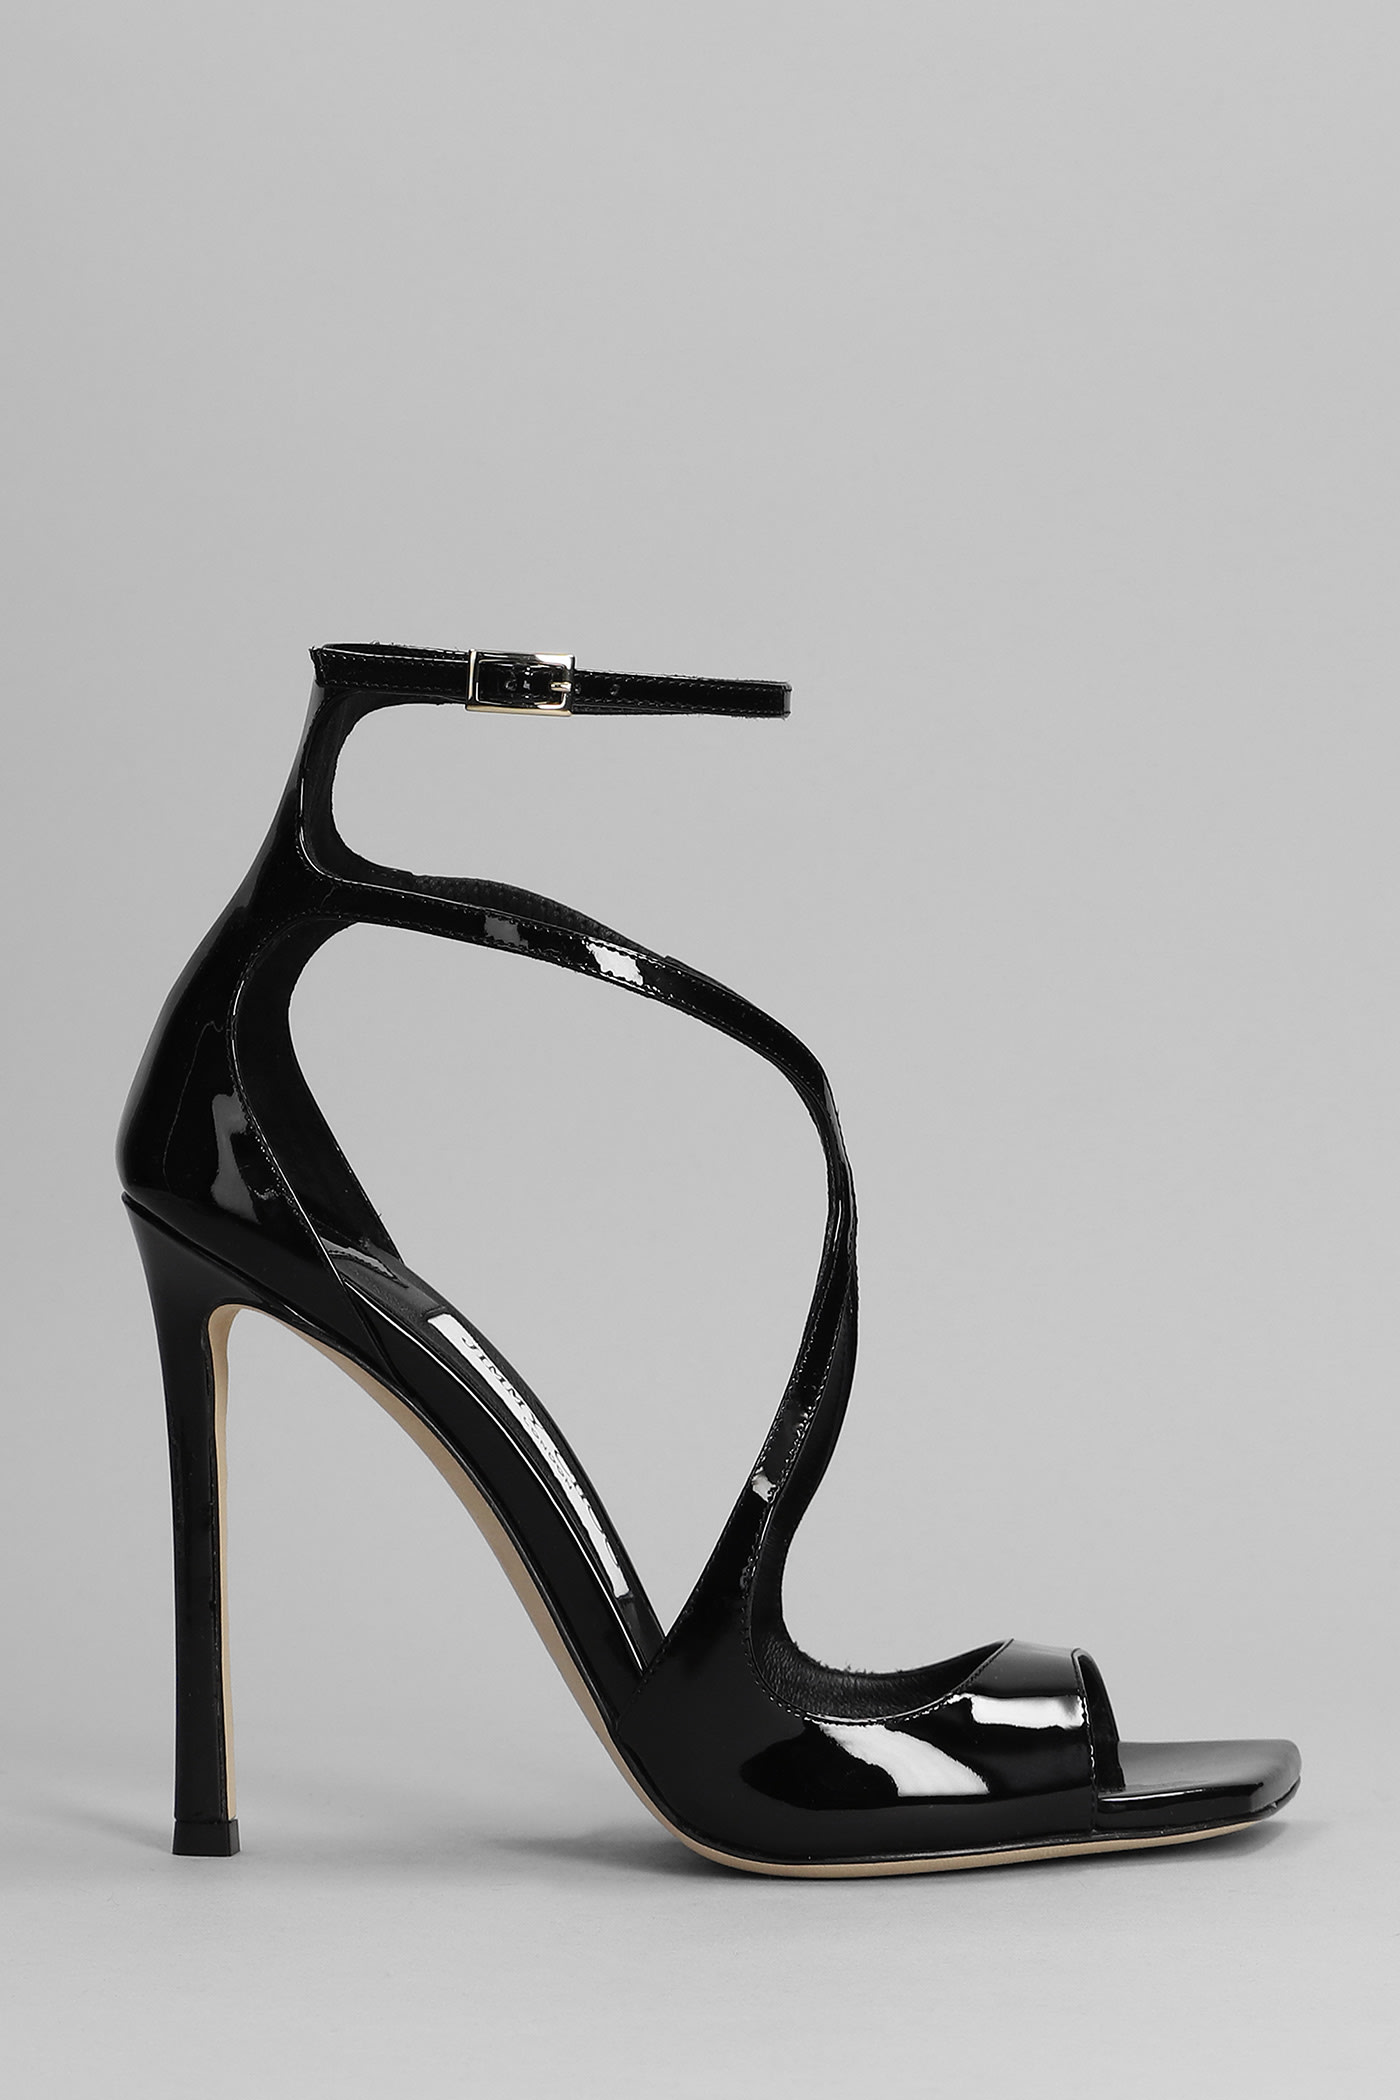 Jimmy Choo Azia 110 Sandals In Black Patent Leather